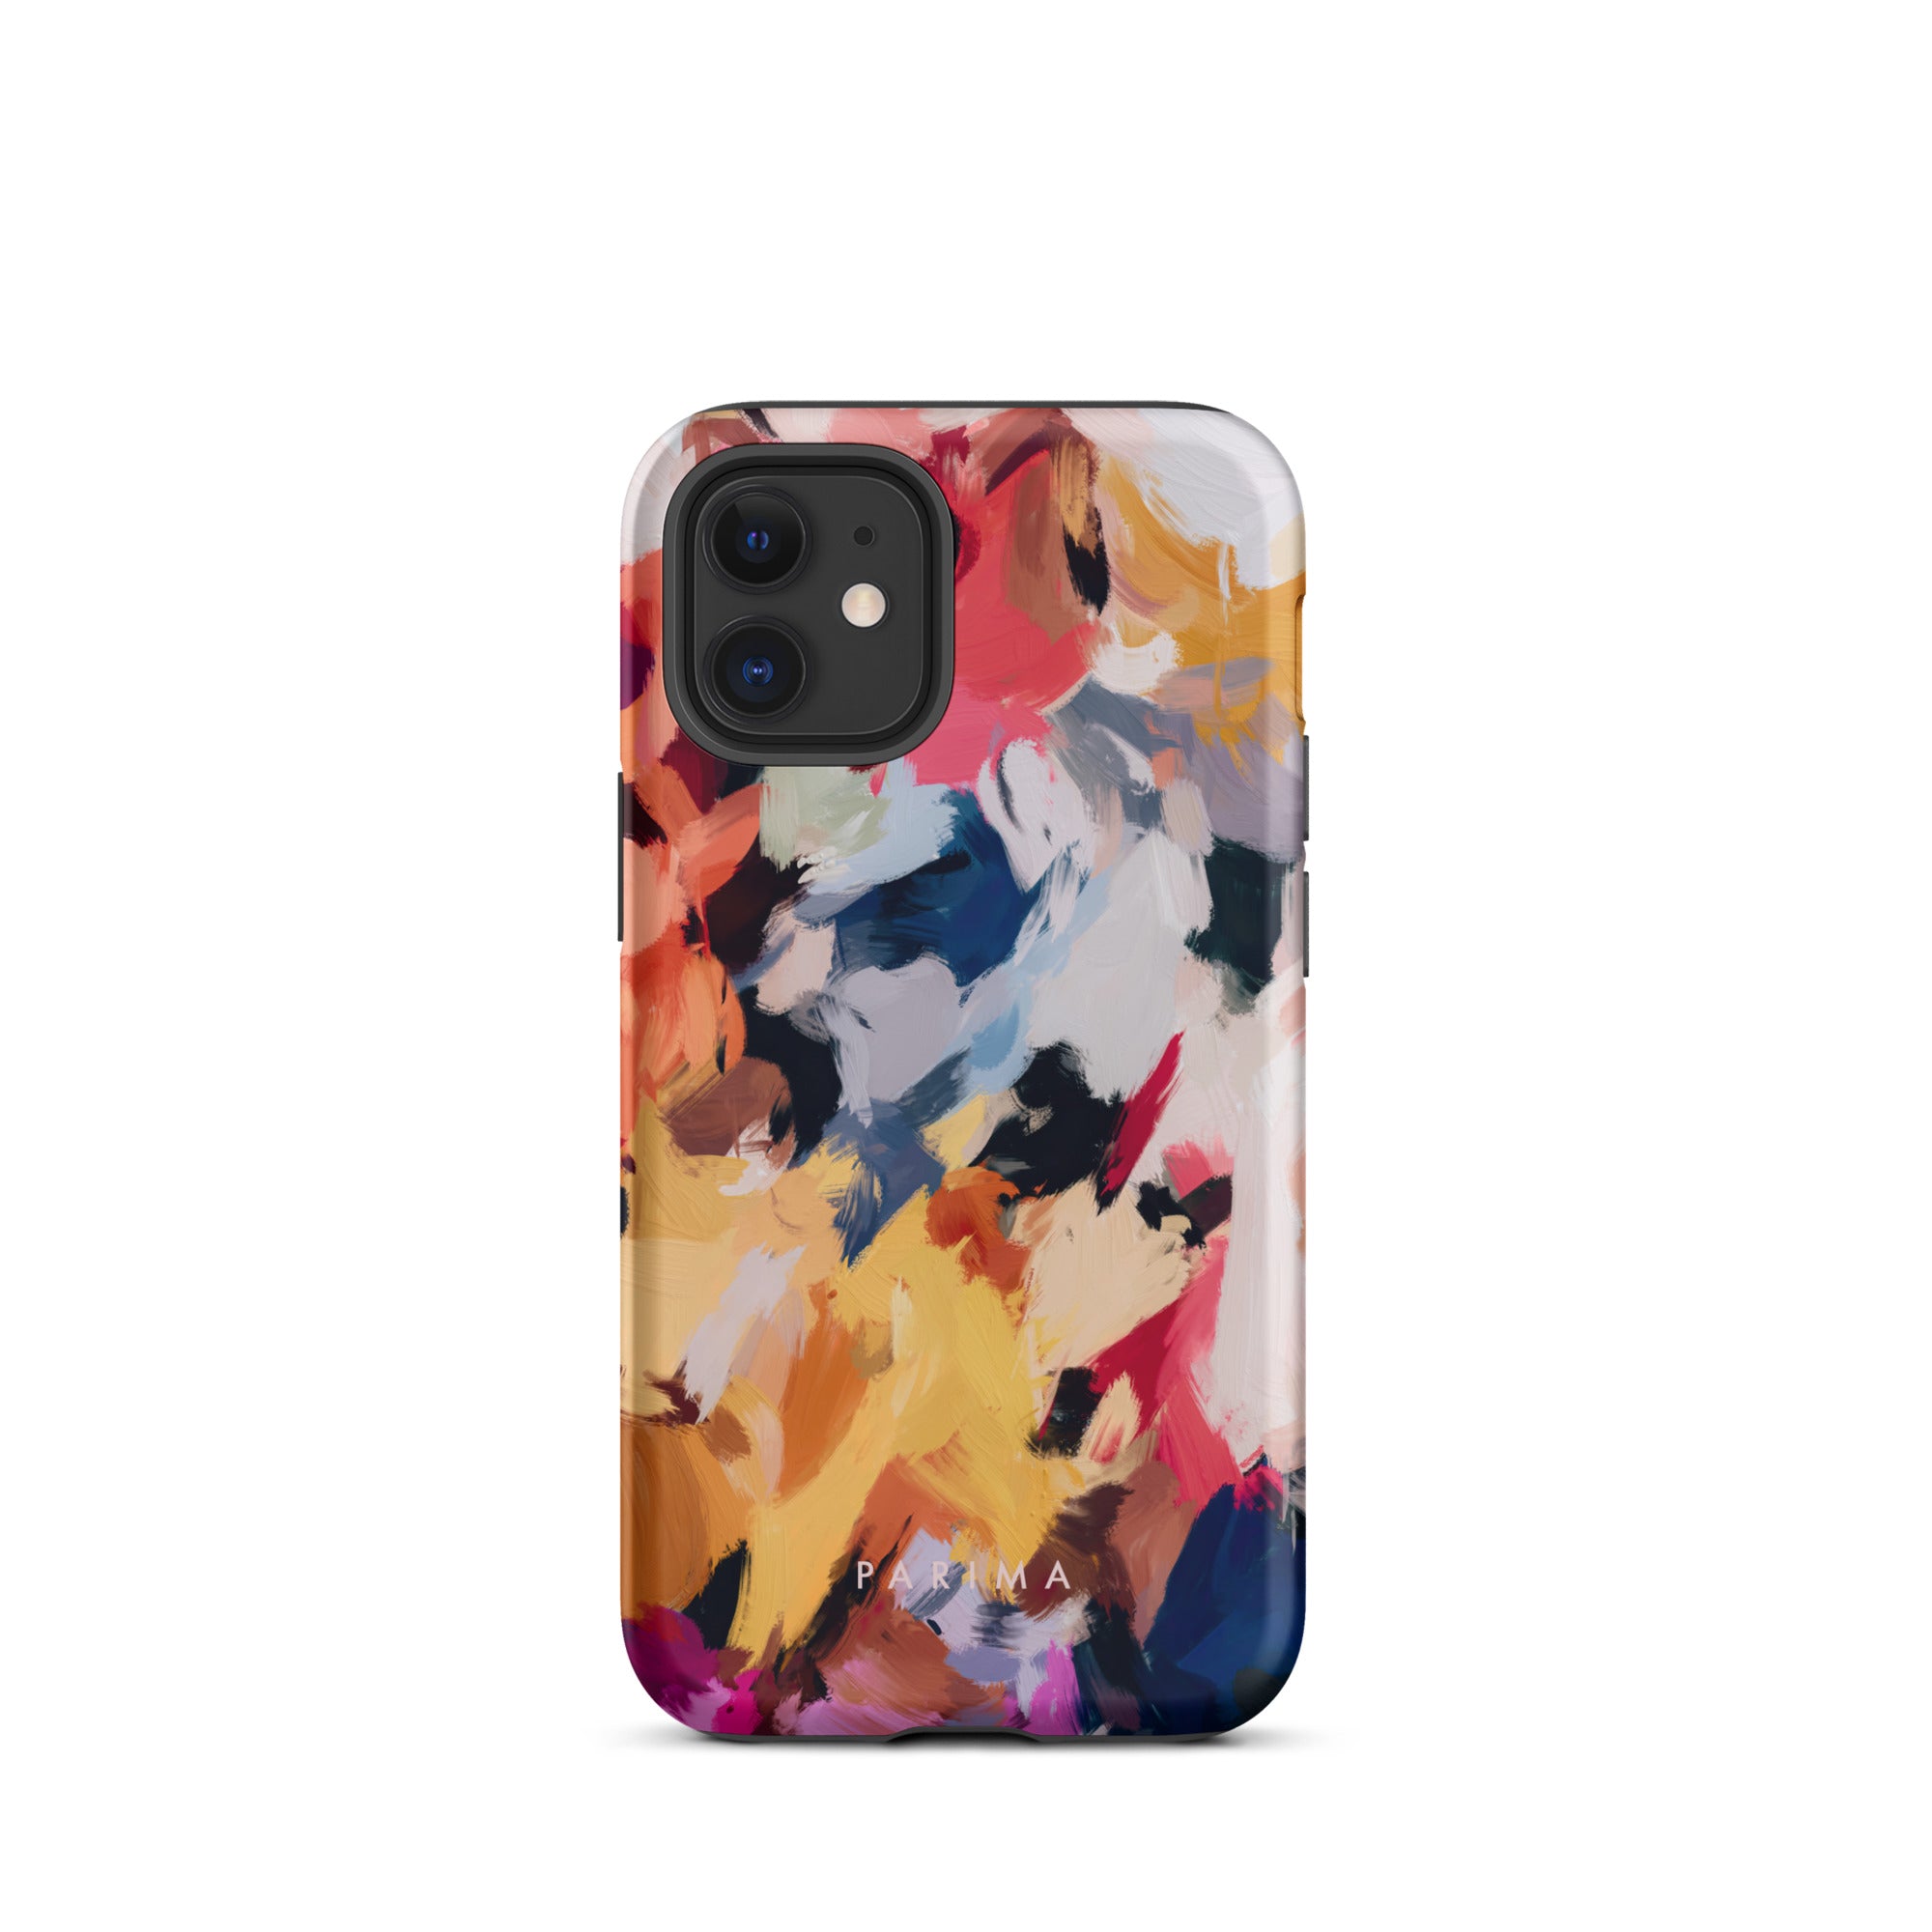 Wilde, blue and yellow abstract art on iPhone 12 mini tough case by Parima Studio